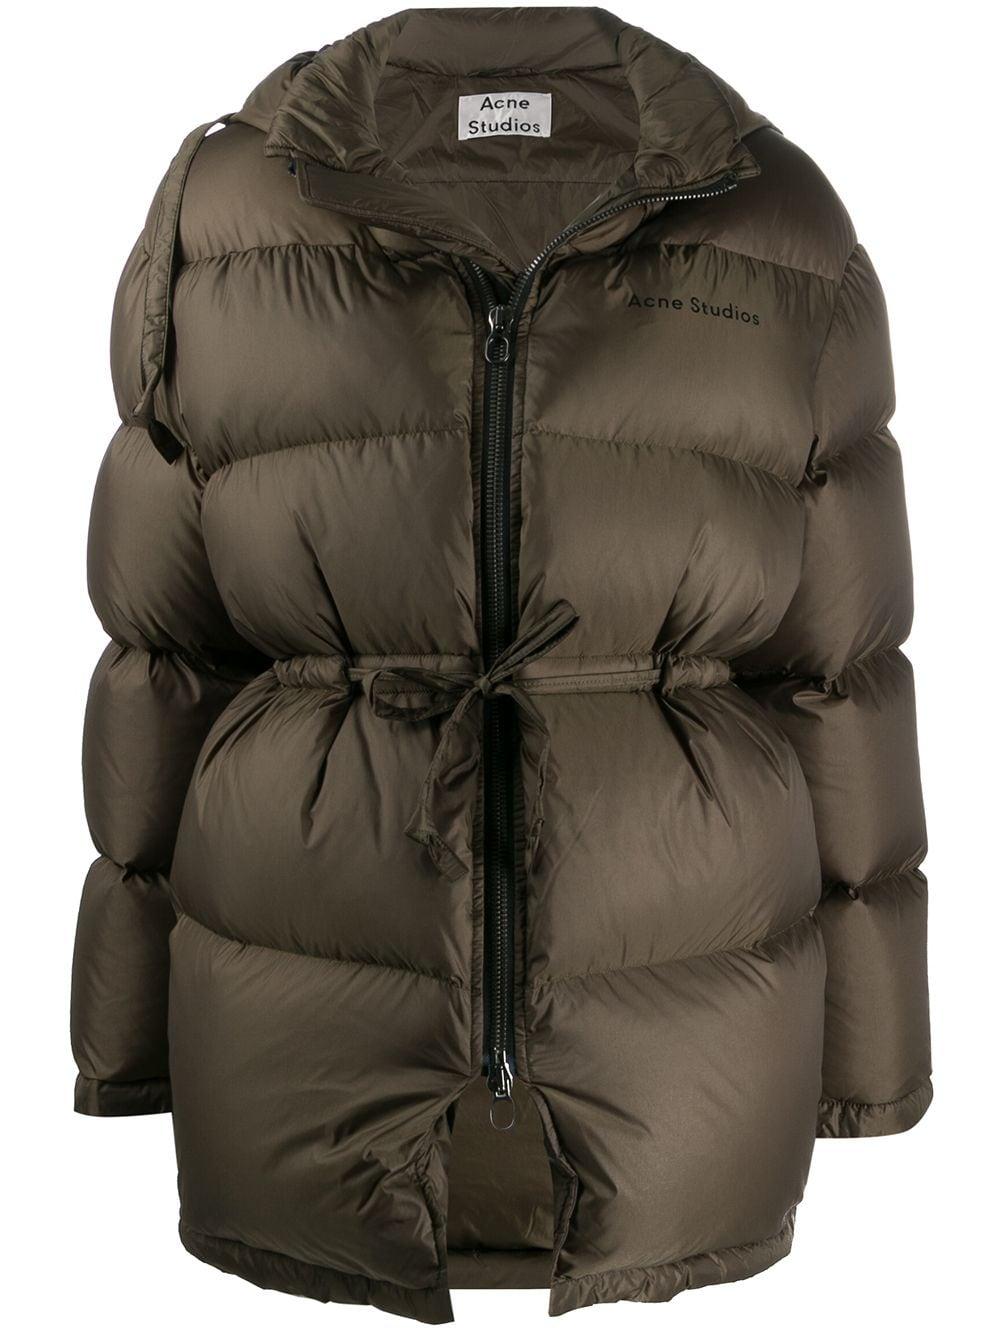 Acne Studios Oversized Hooded Quilted Shell Down Jacket in Army Green  (Green) - Lyst